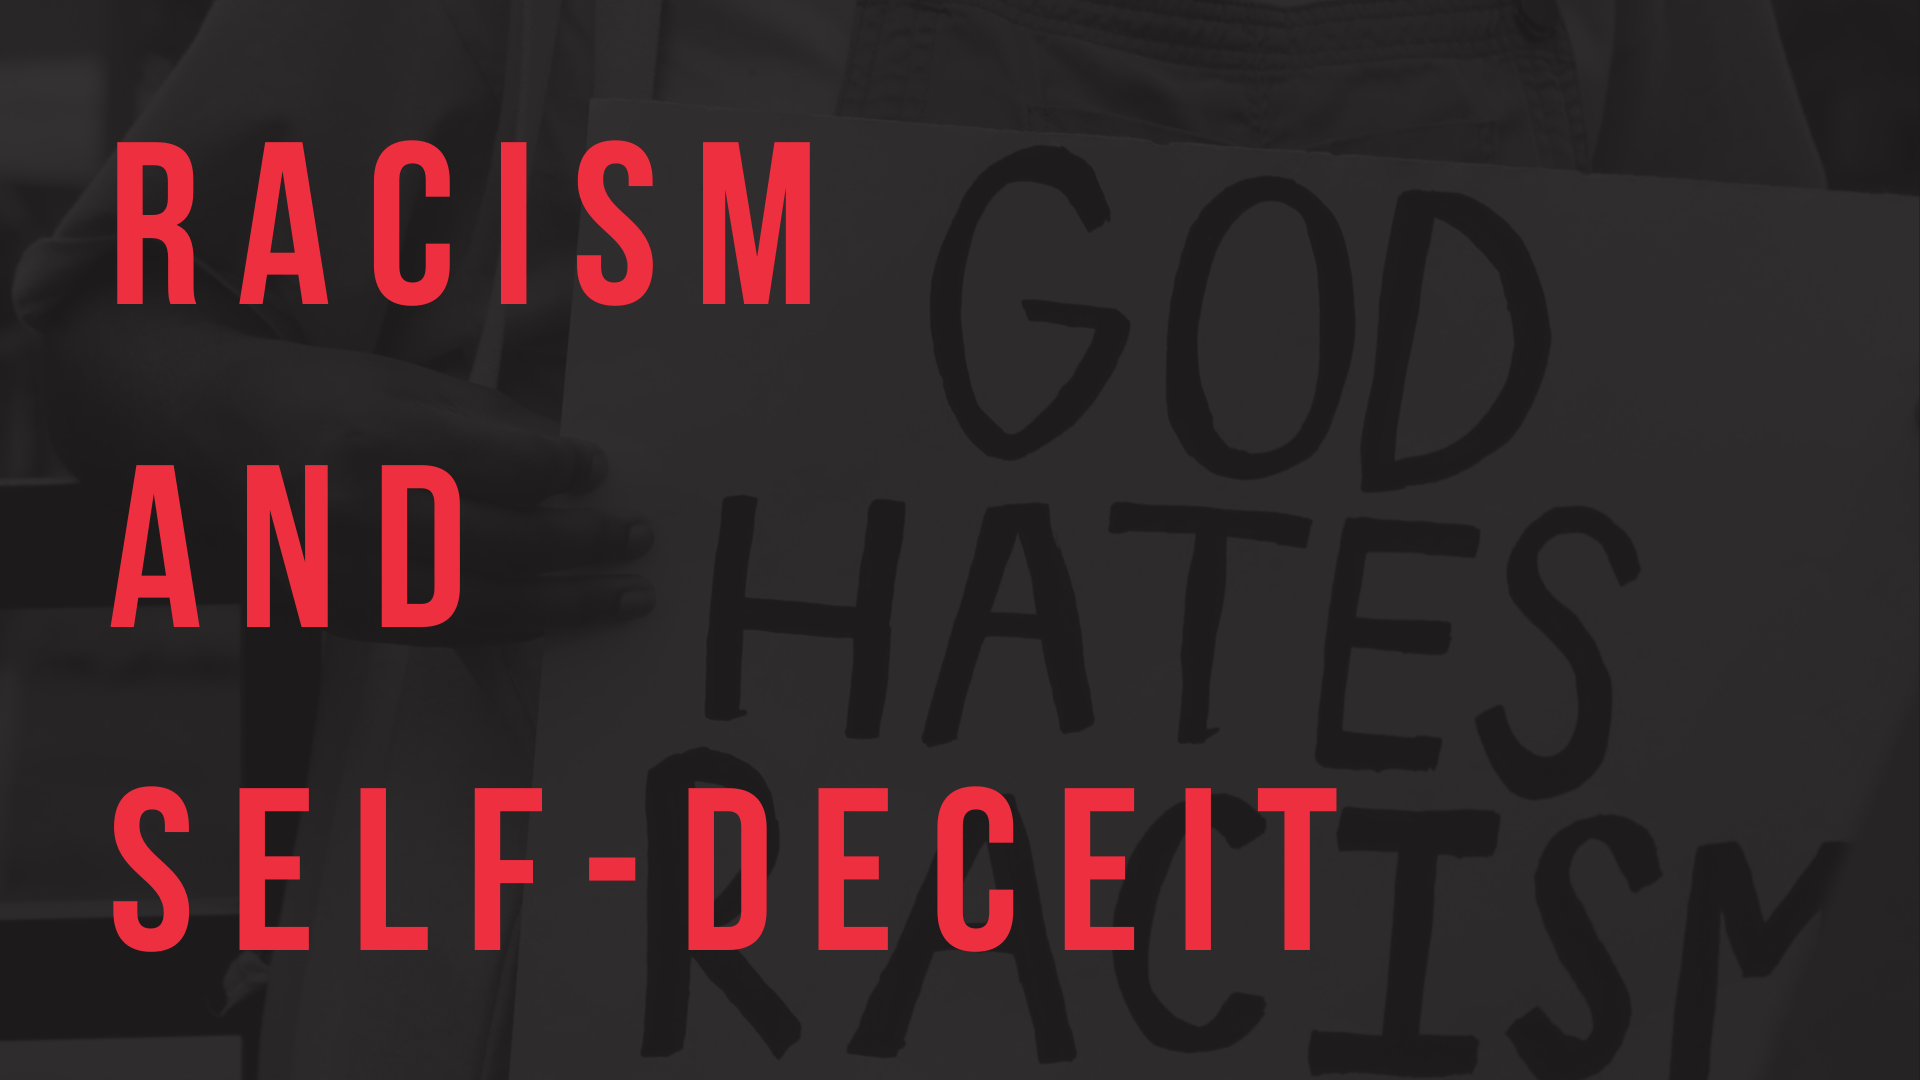 Racism and Self Deceit